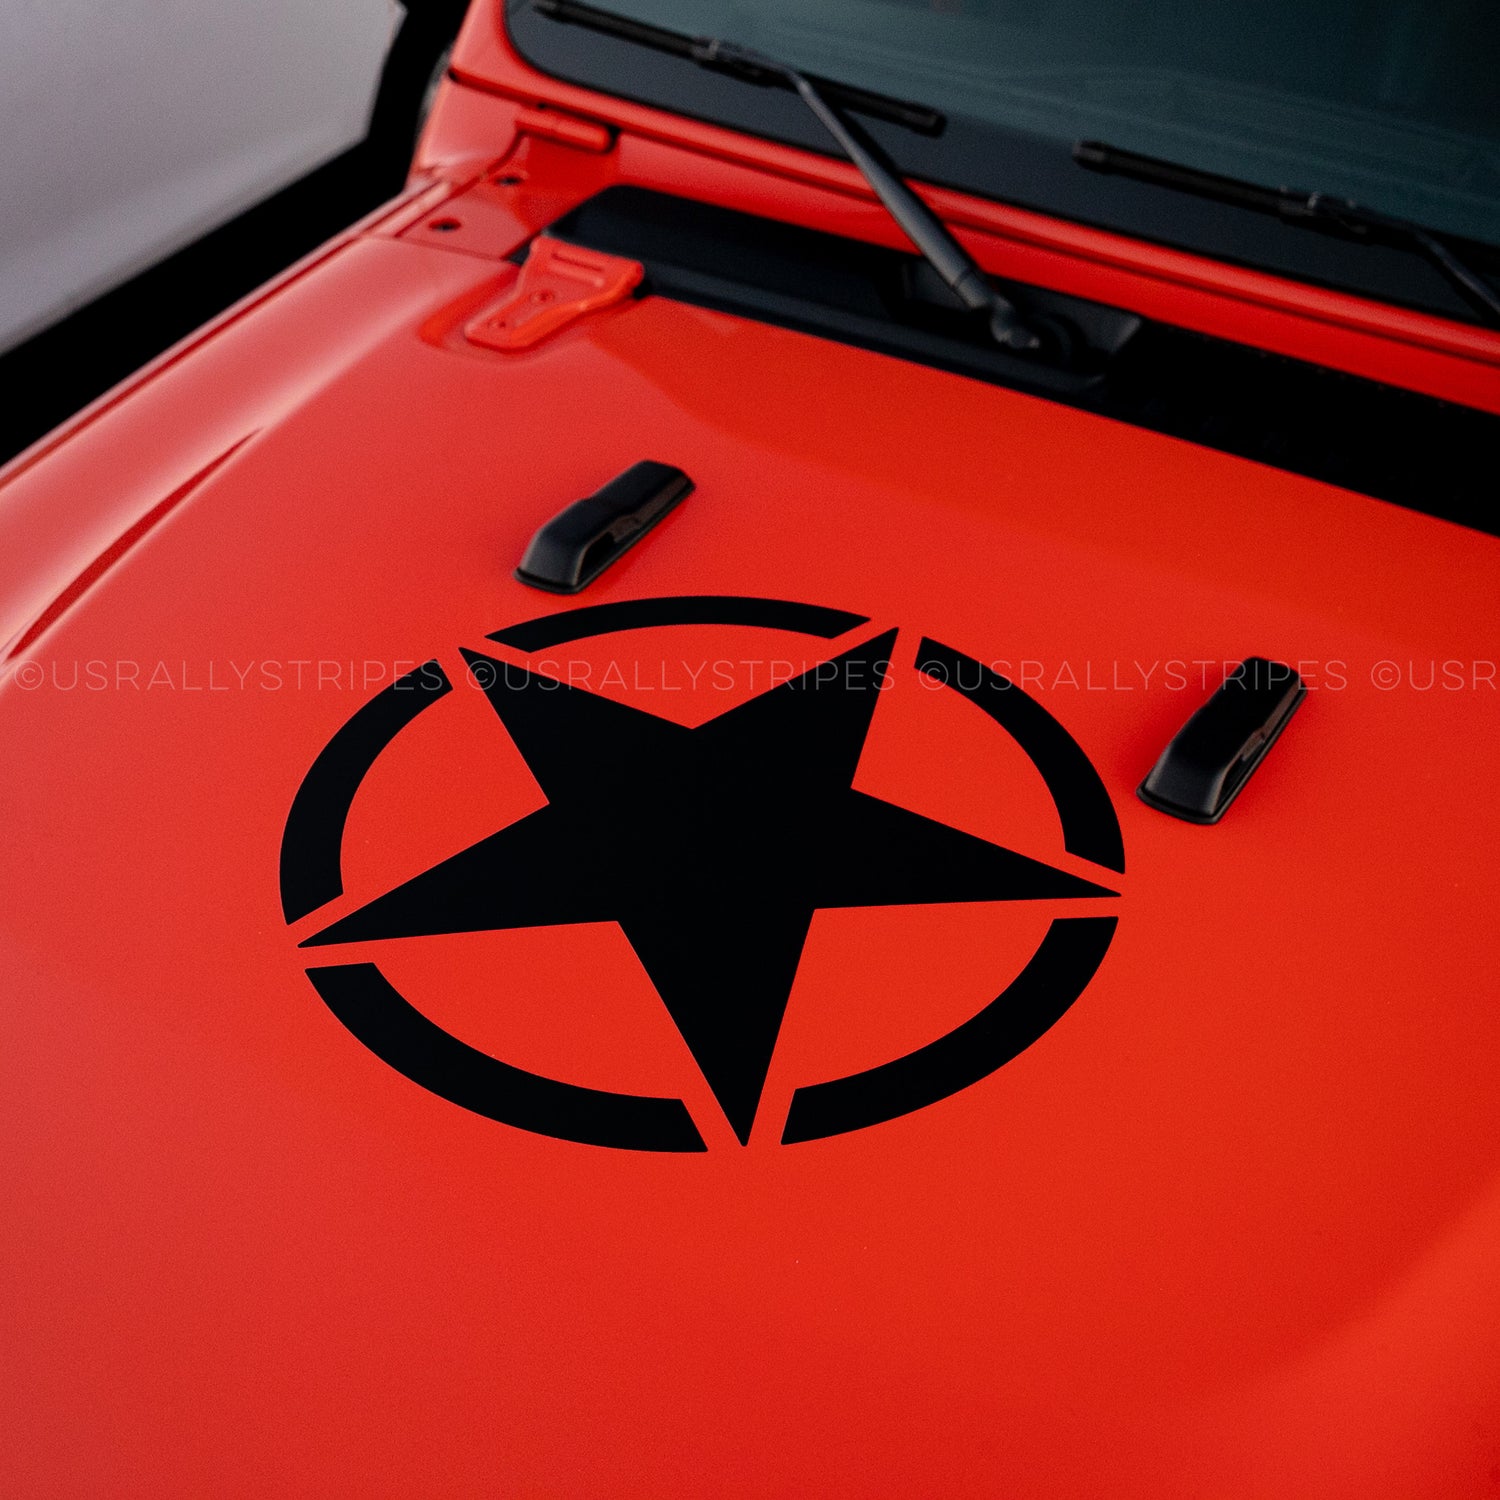 US Military star decal for 2020 Jeep Wrangler JL accessory - US Rallystripes